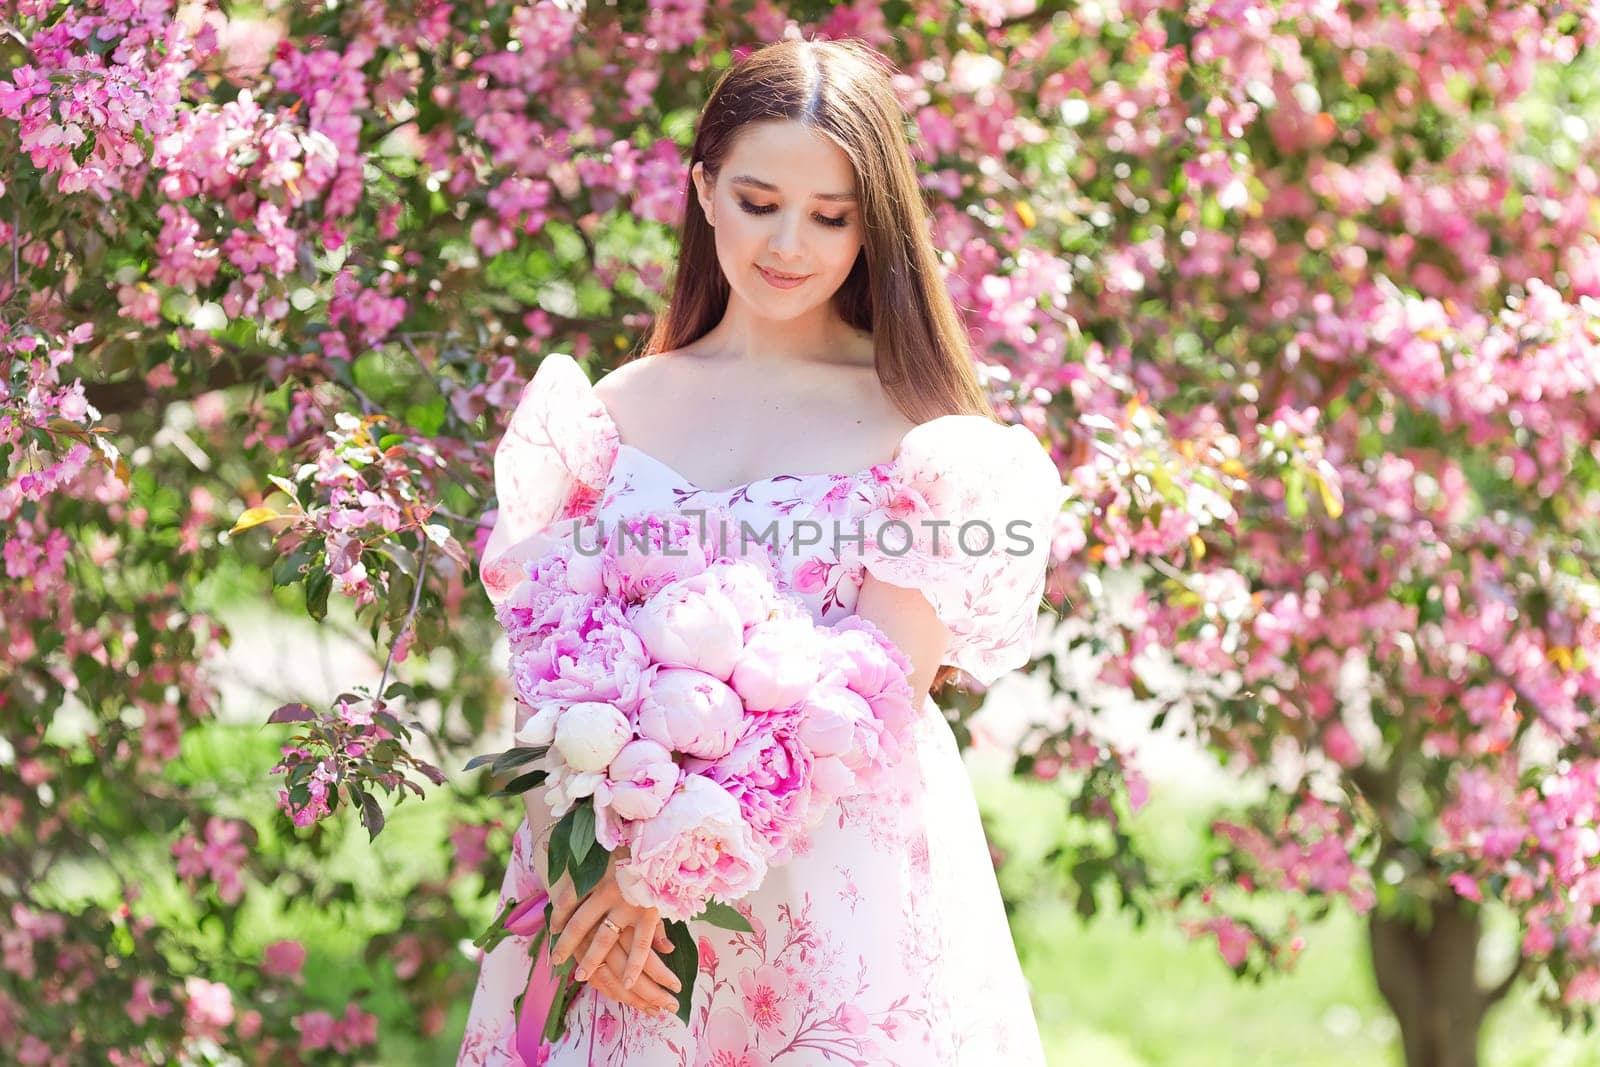 A girl in a light pink dress, with a large bouquet of pink peonies, stands next to her in a pink blooming garden on a sunny day. Copy space